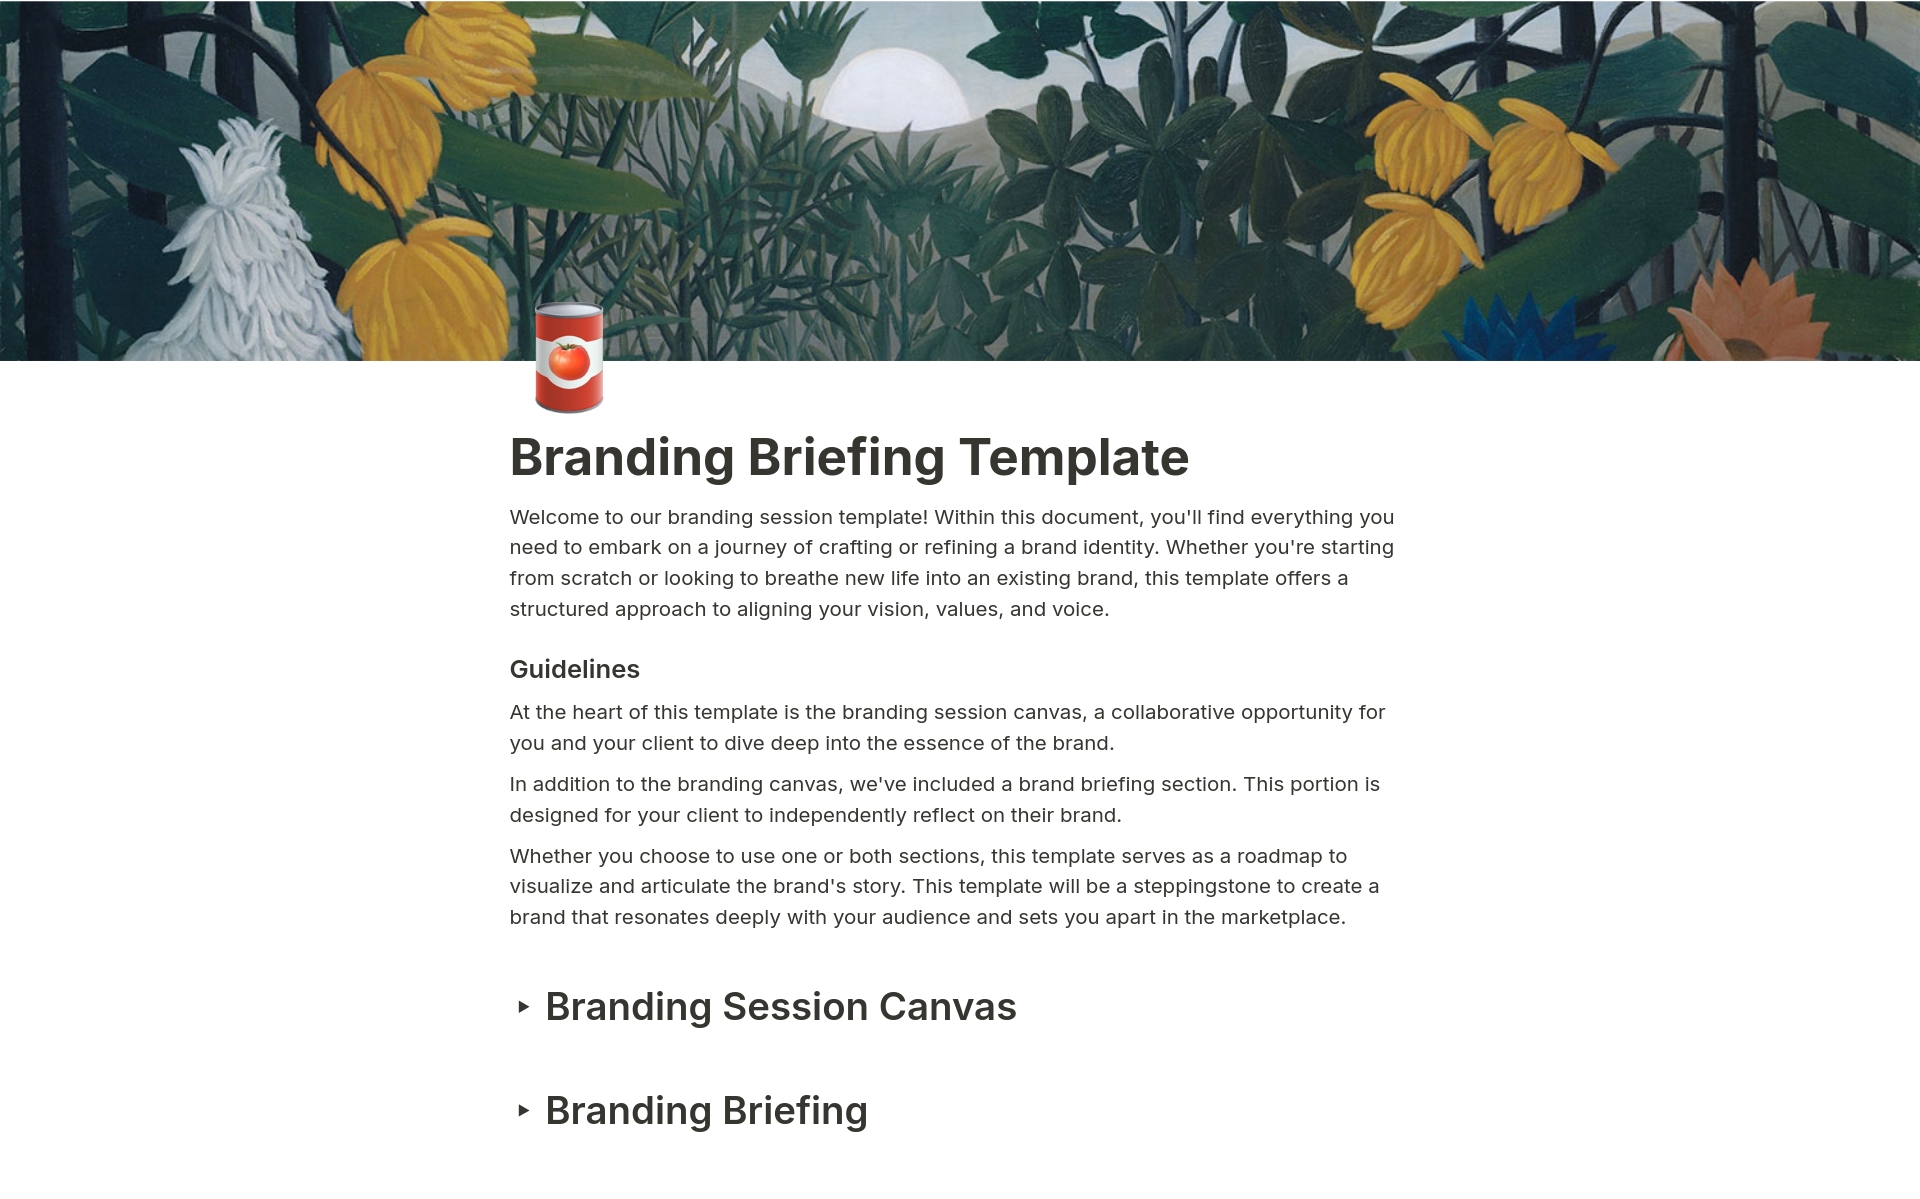 Branding Session Canvas & Briefing questionsのテンプレートのプレビュー